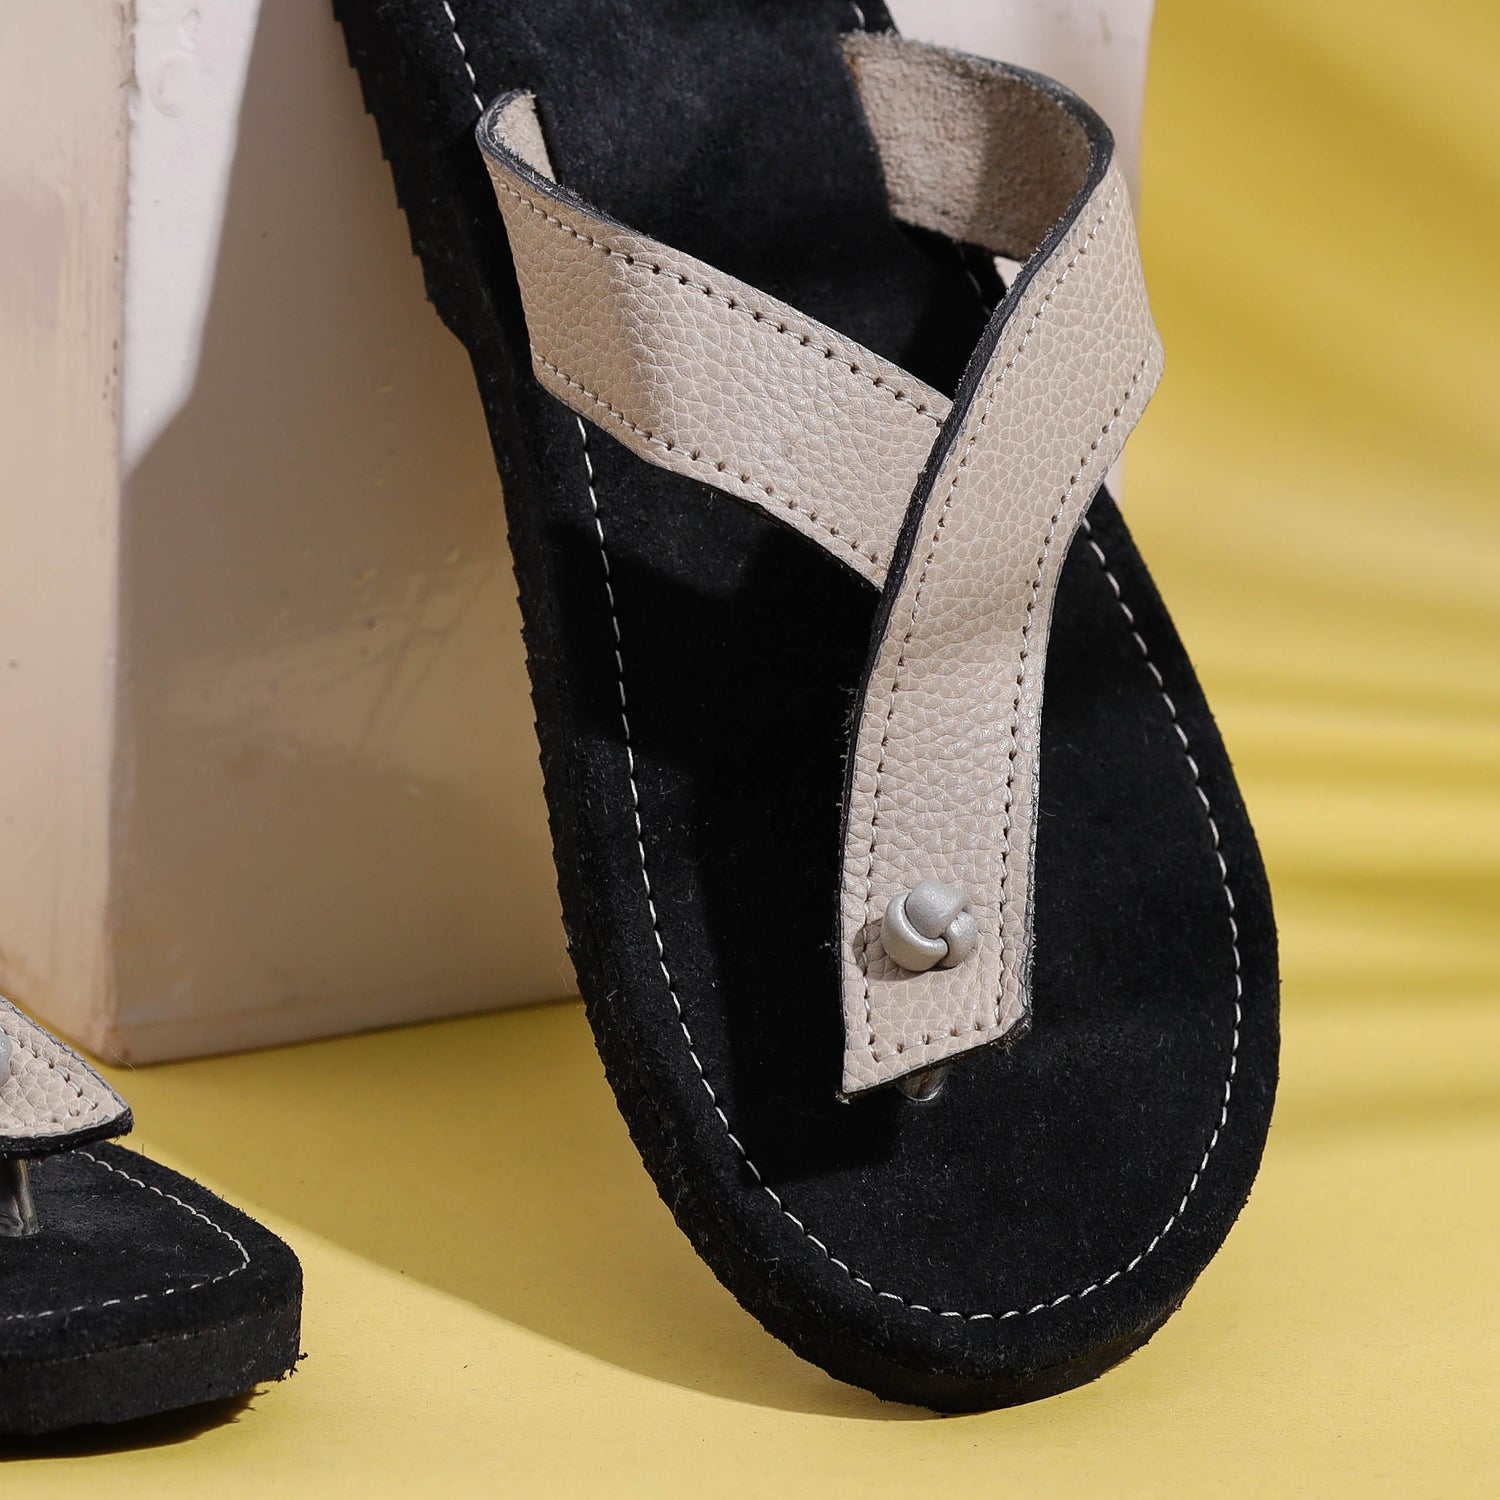 Black & White Handcrafted Women's Leather Slippers with Suede